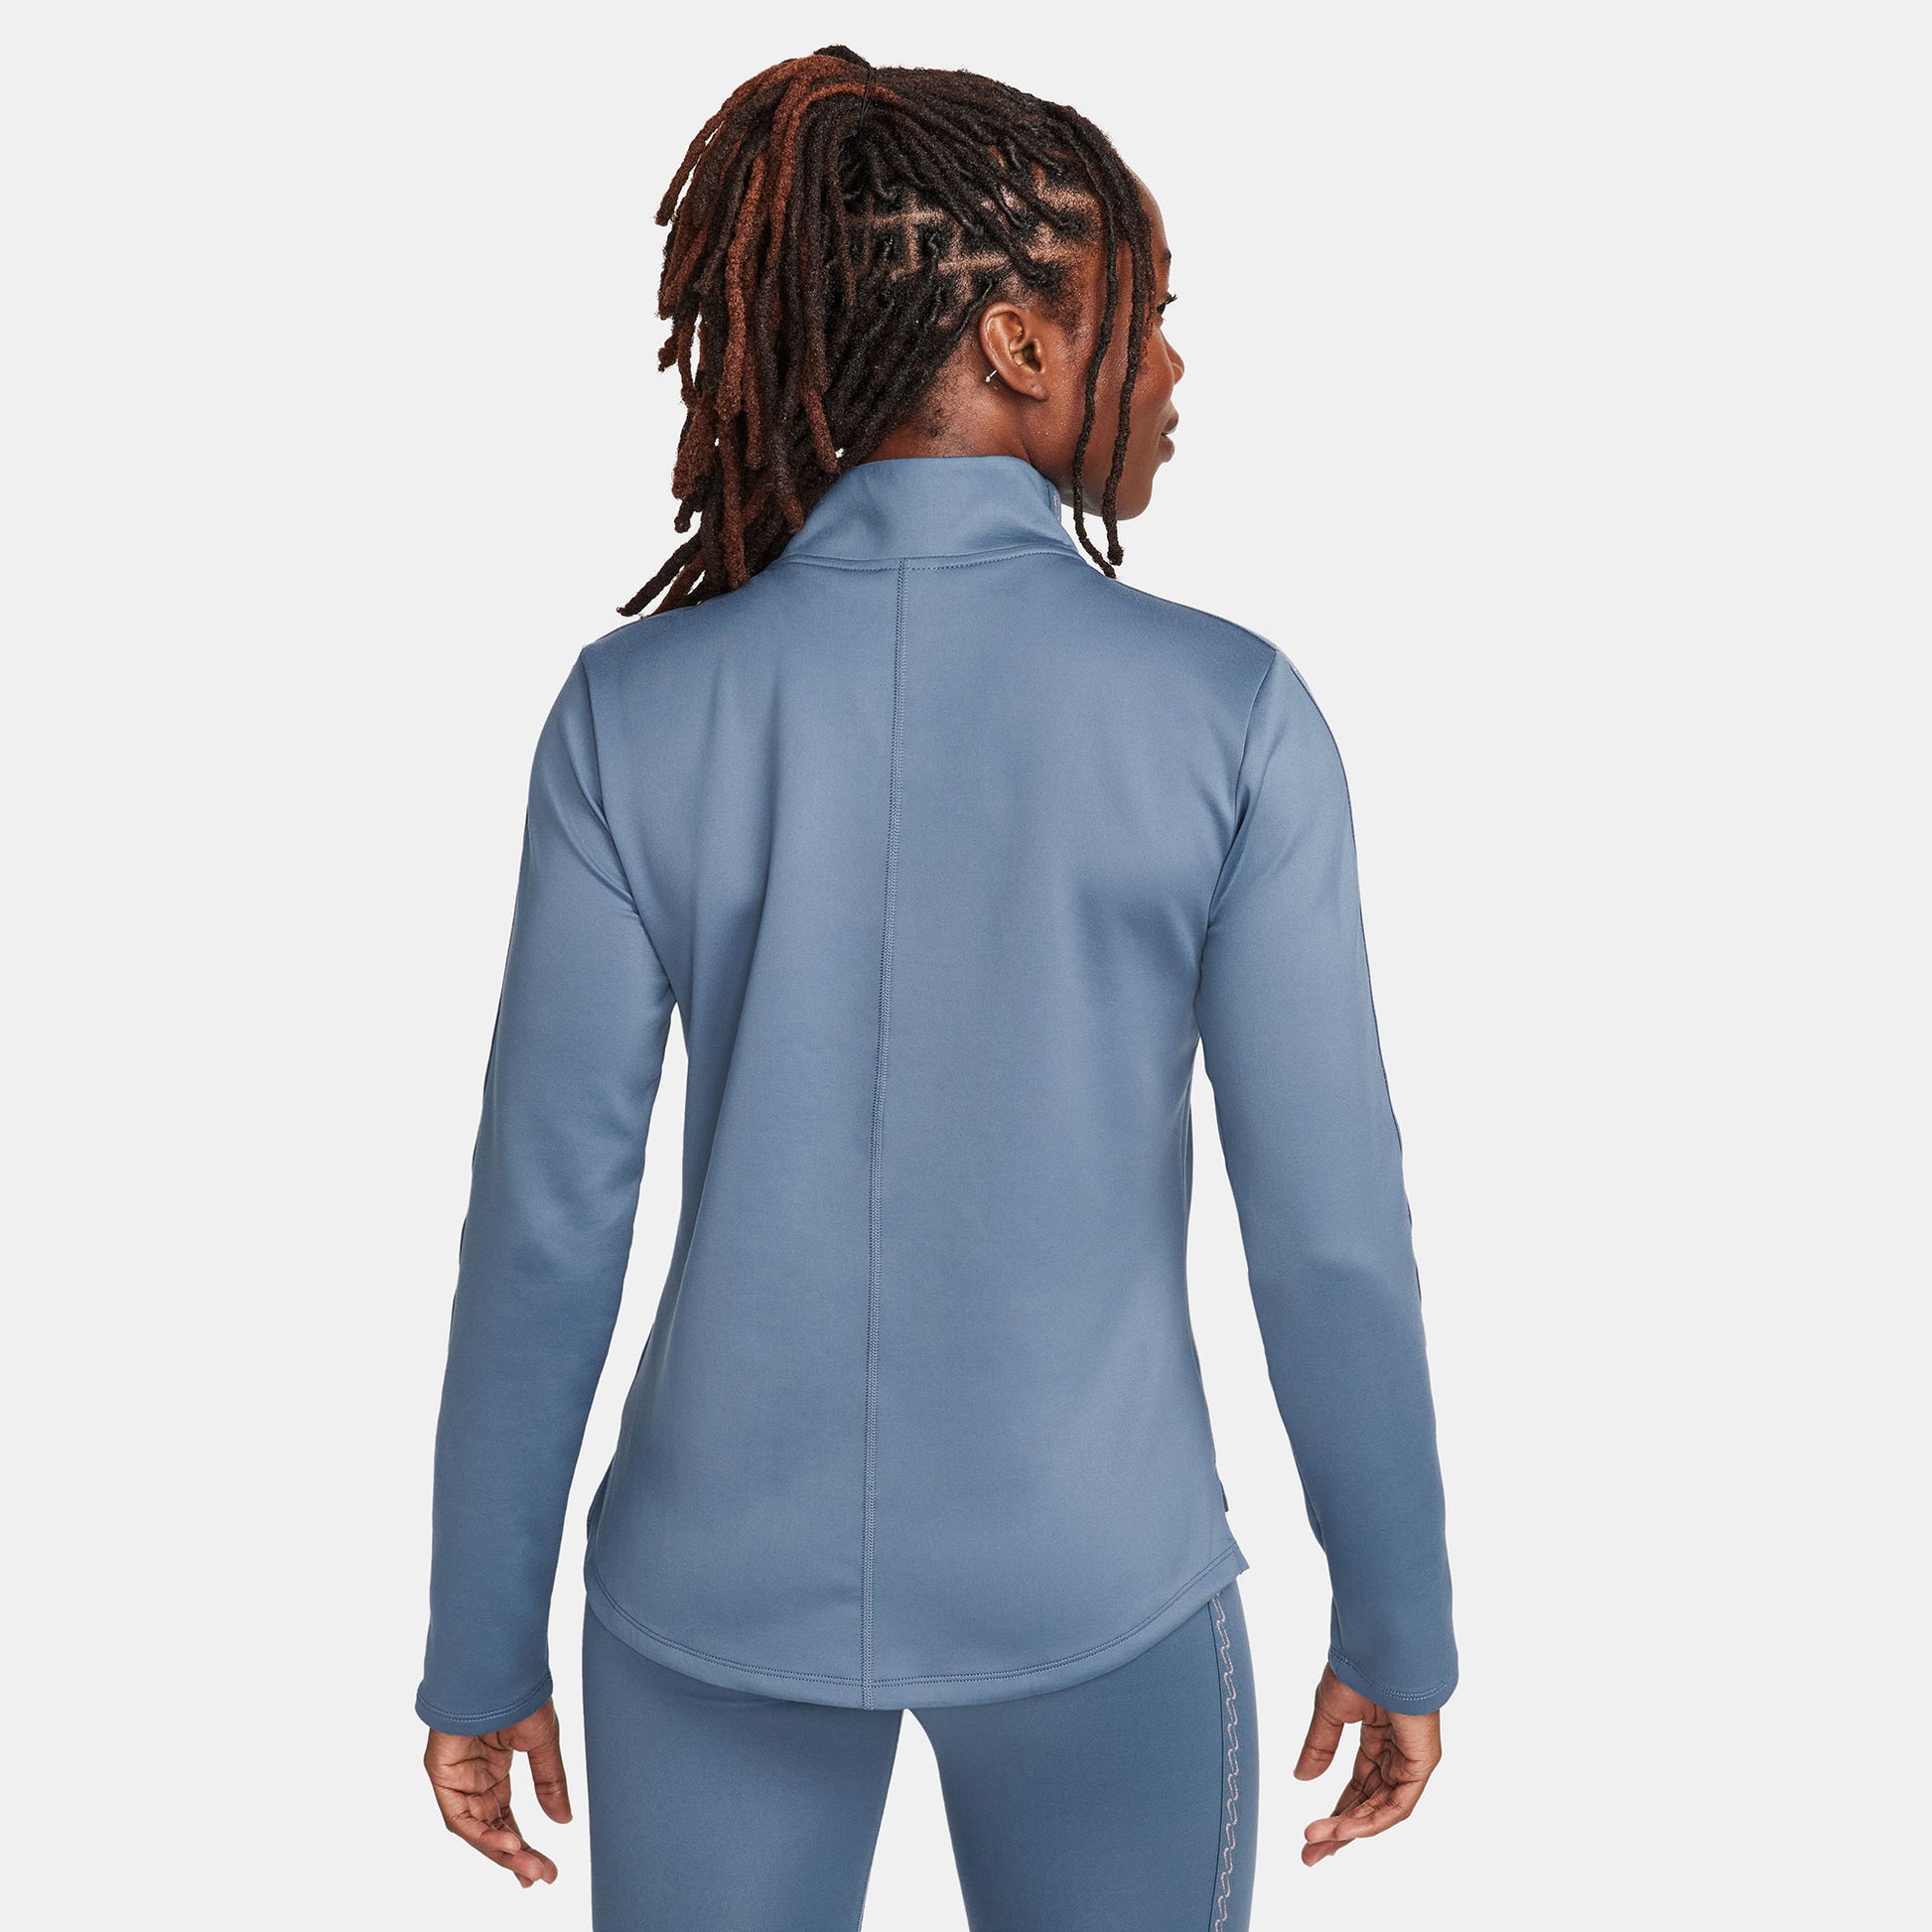 Nike One Therma-FIT Women's Half-Zip Novelty Top Blue (2)